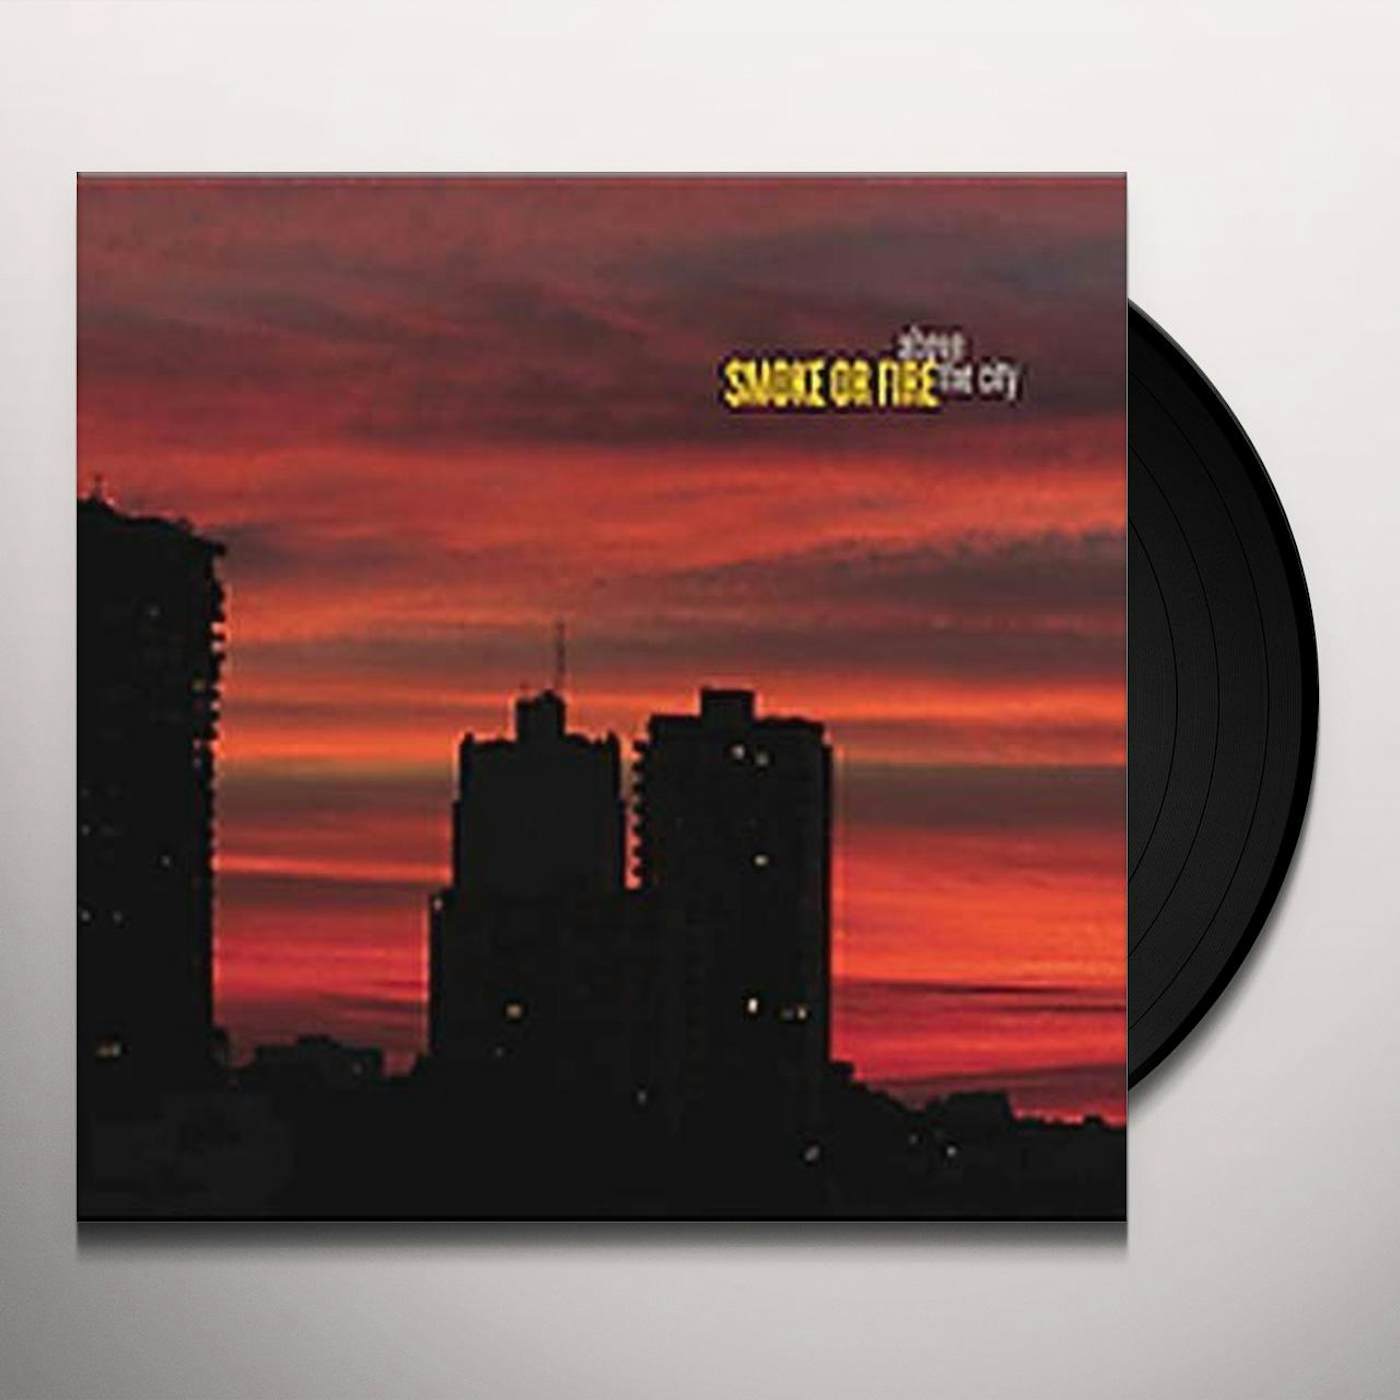 Smoke Or Fire Above the City Vinyl Record